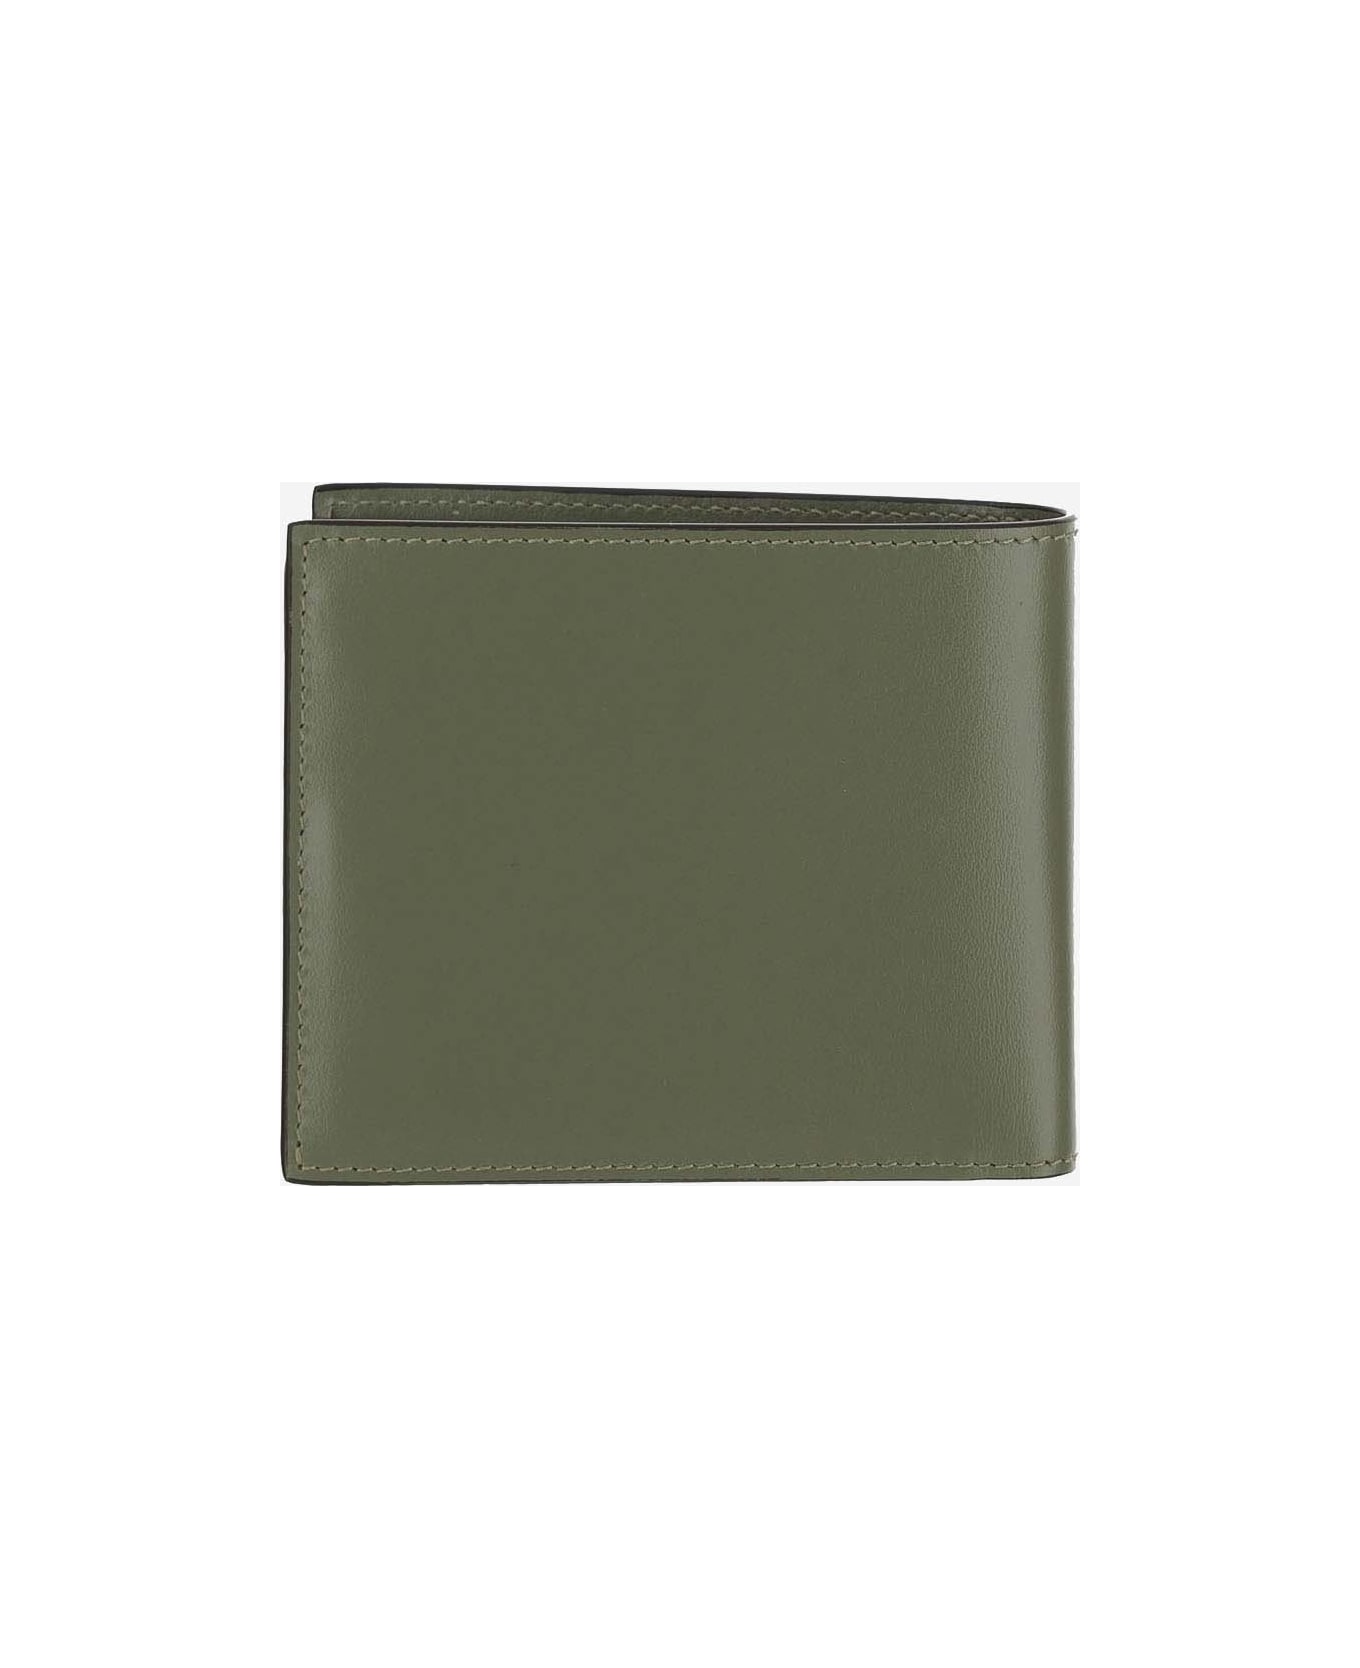 Montblanc Meisterstück Wallet 8 Compartments - CLAY